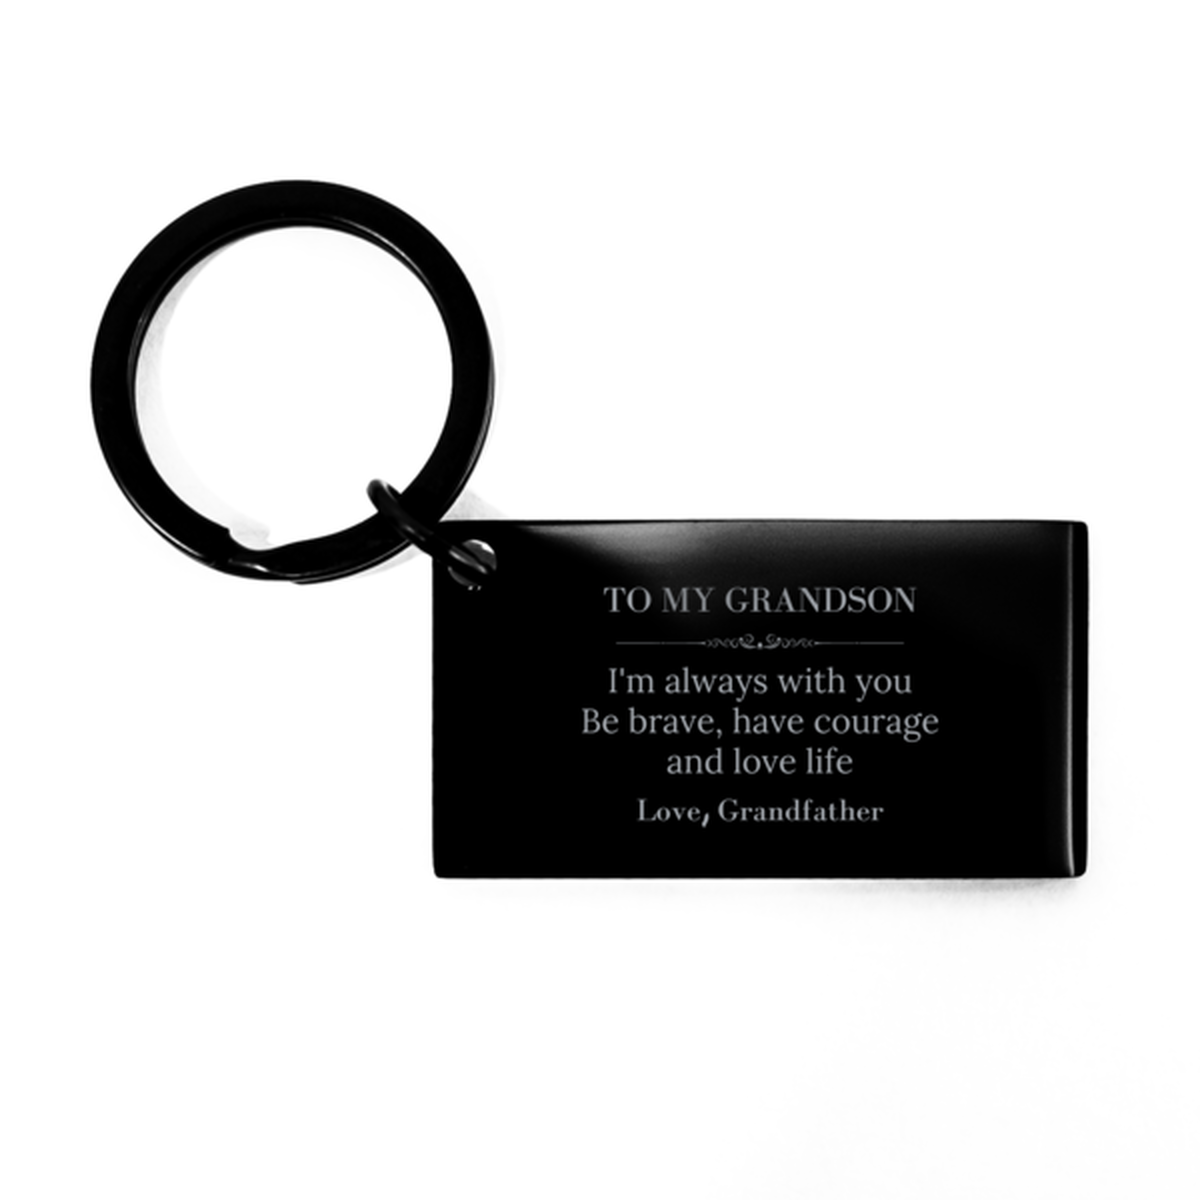 To My Grandson Gifts from Grandfather, Unique Keychain Inspirational Christmas Birthday Graduation Gifts for Grandson I'm always with you. Be brave, have courage and love life. Love, Grandfather